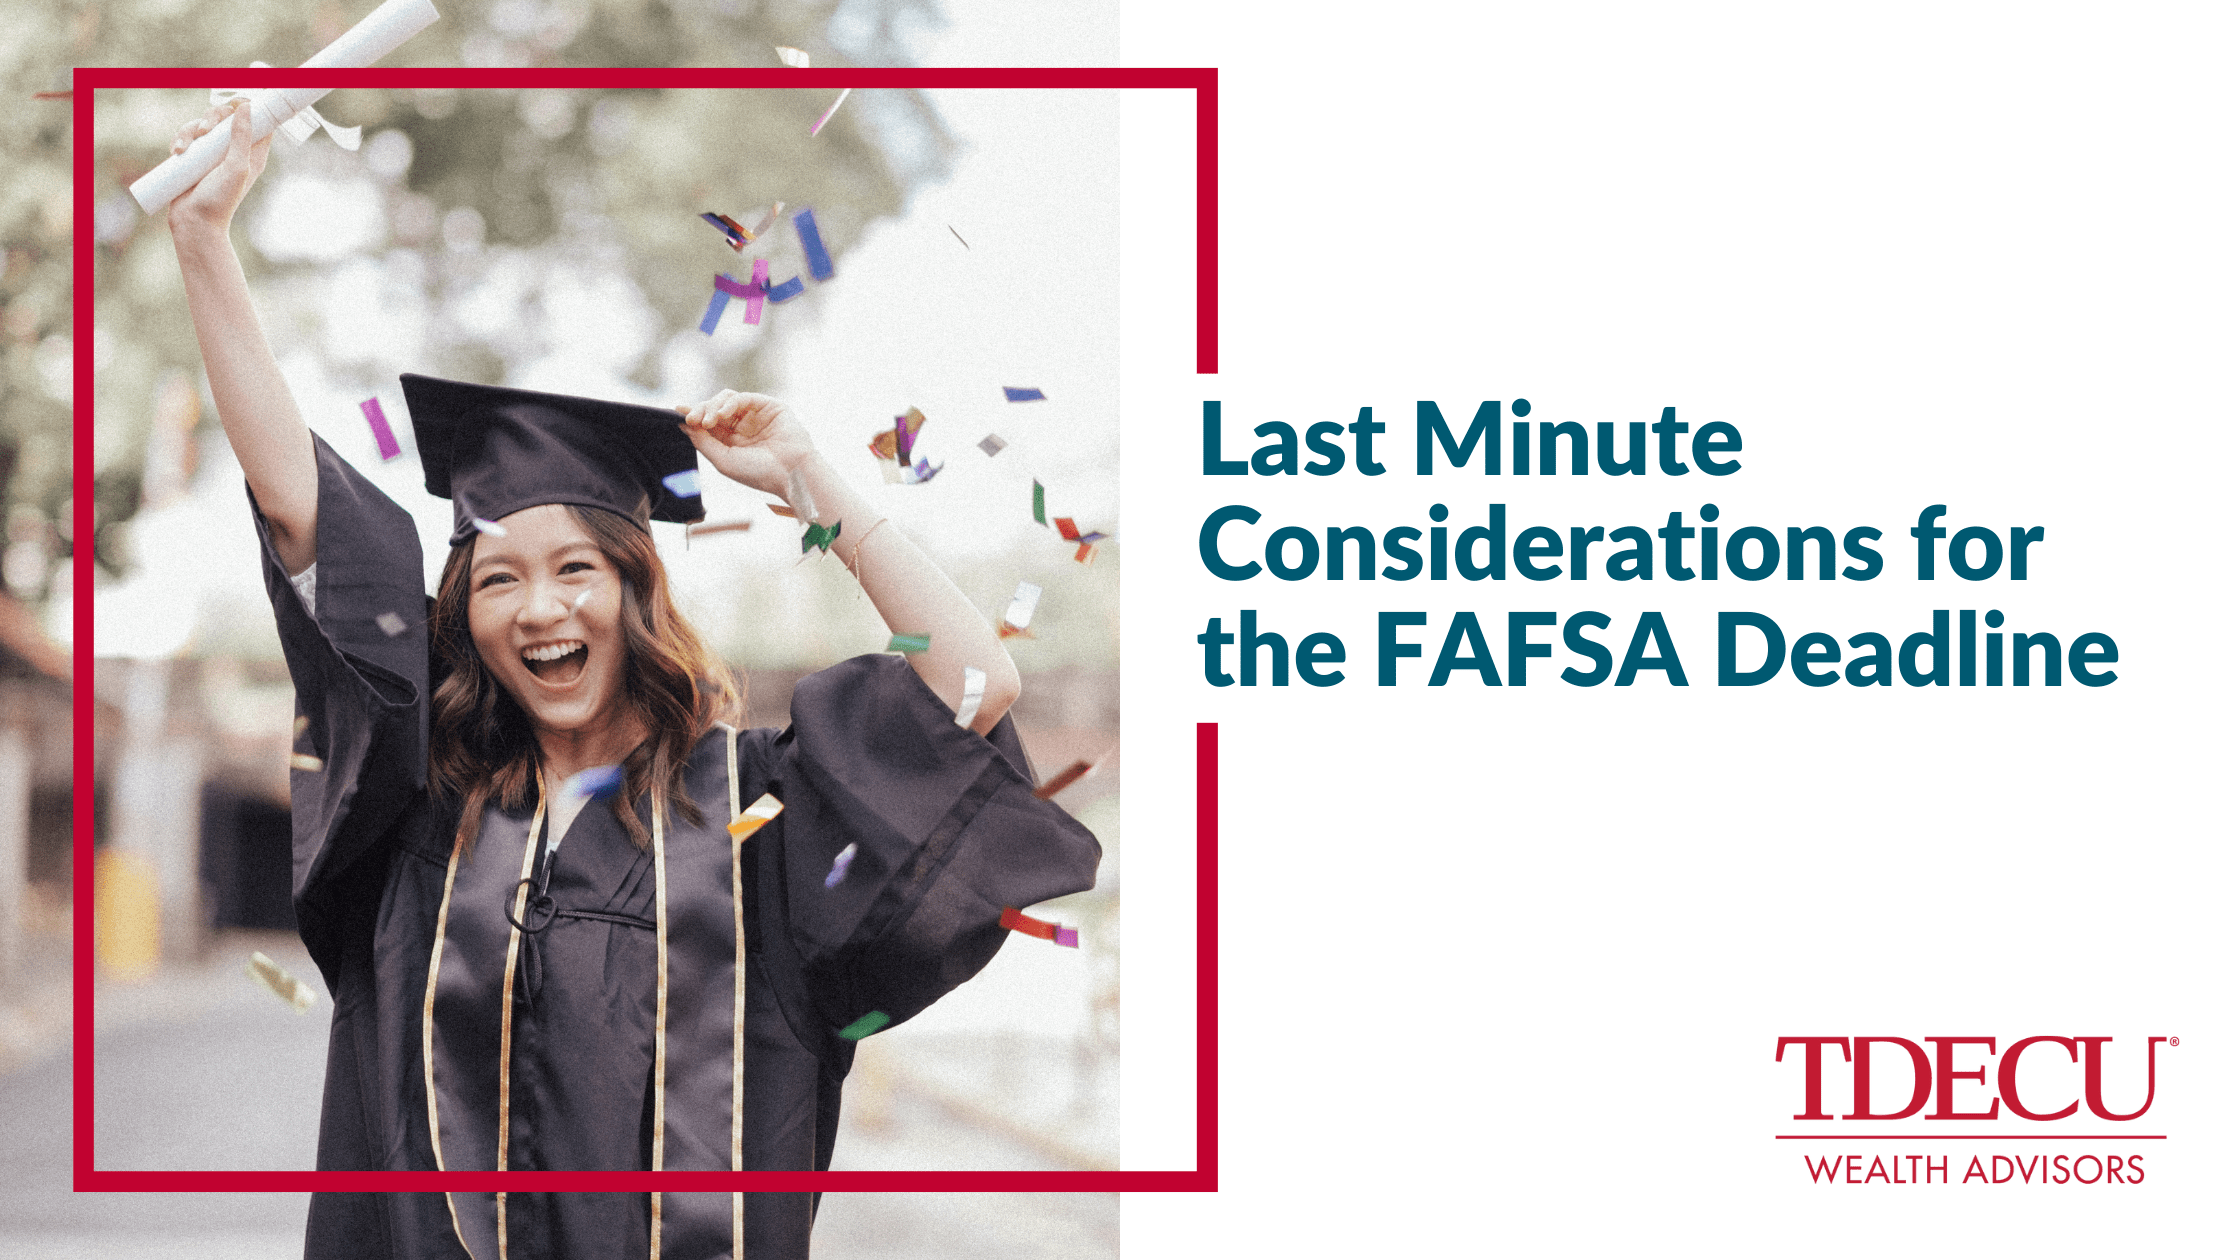 Last Minute Considerations for the FAFSA Deadline